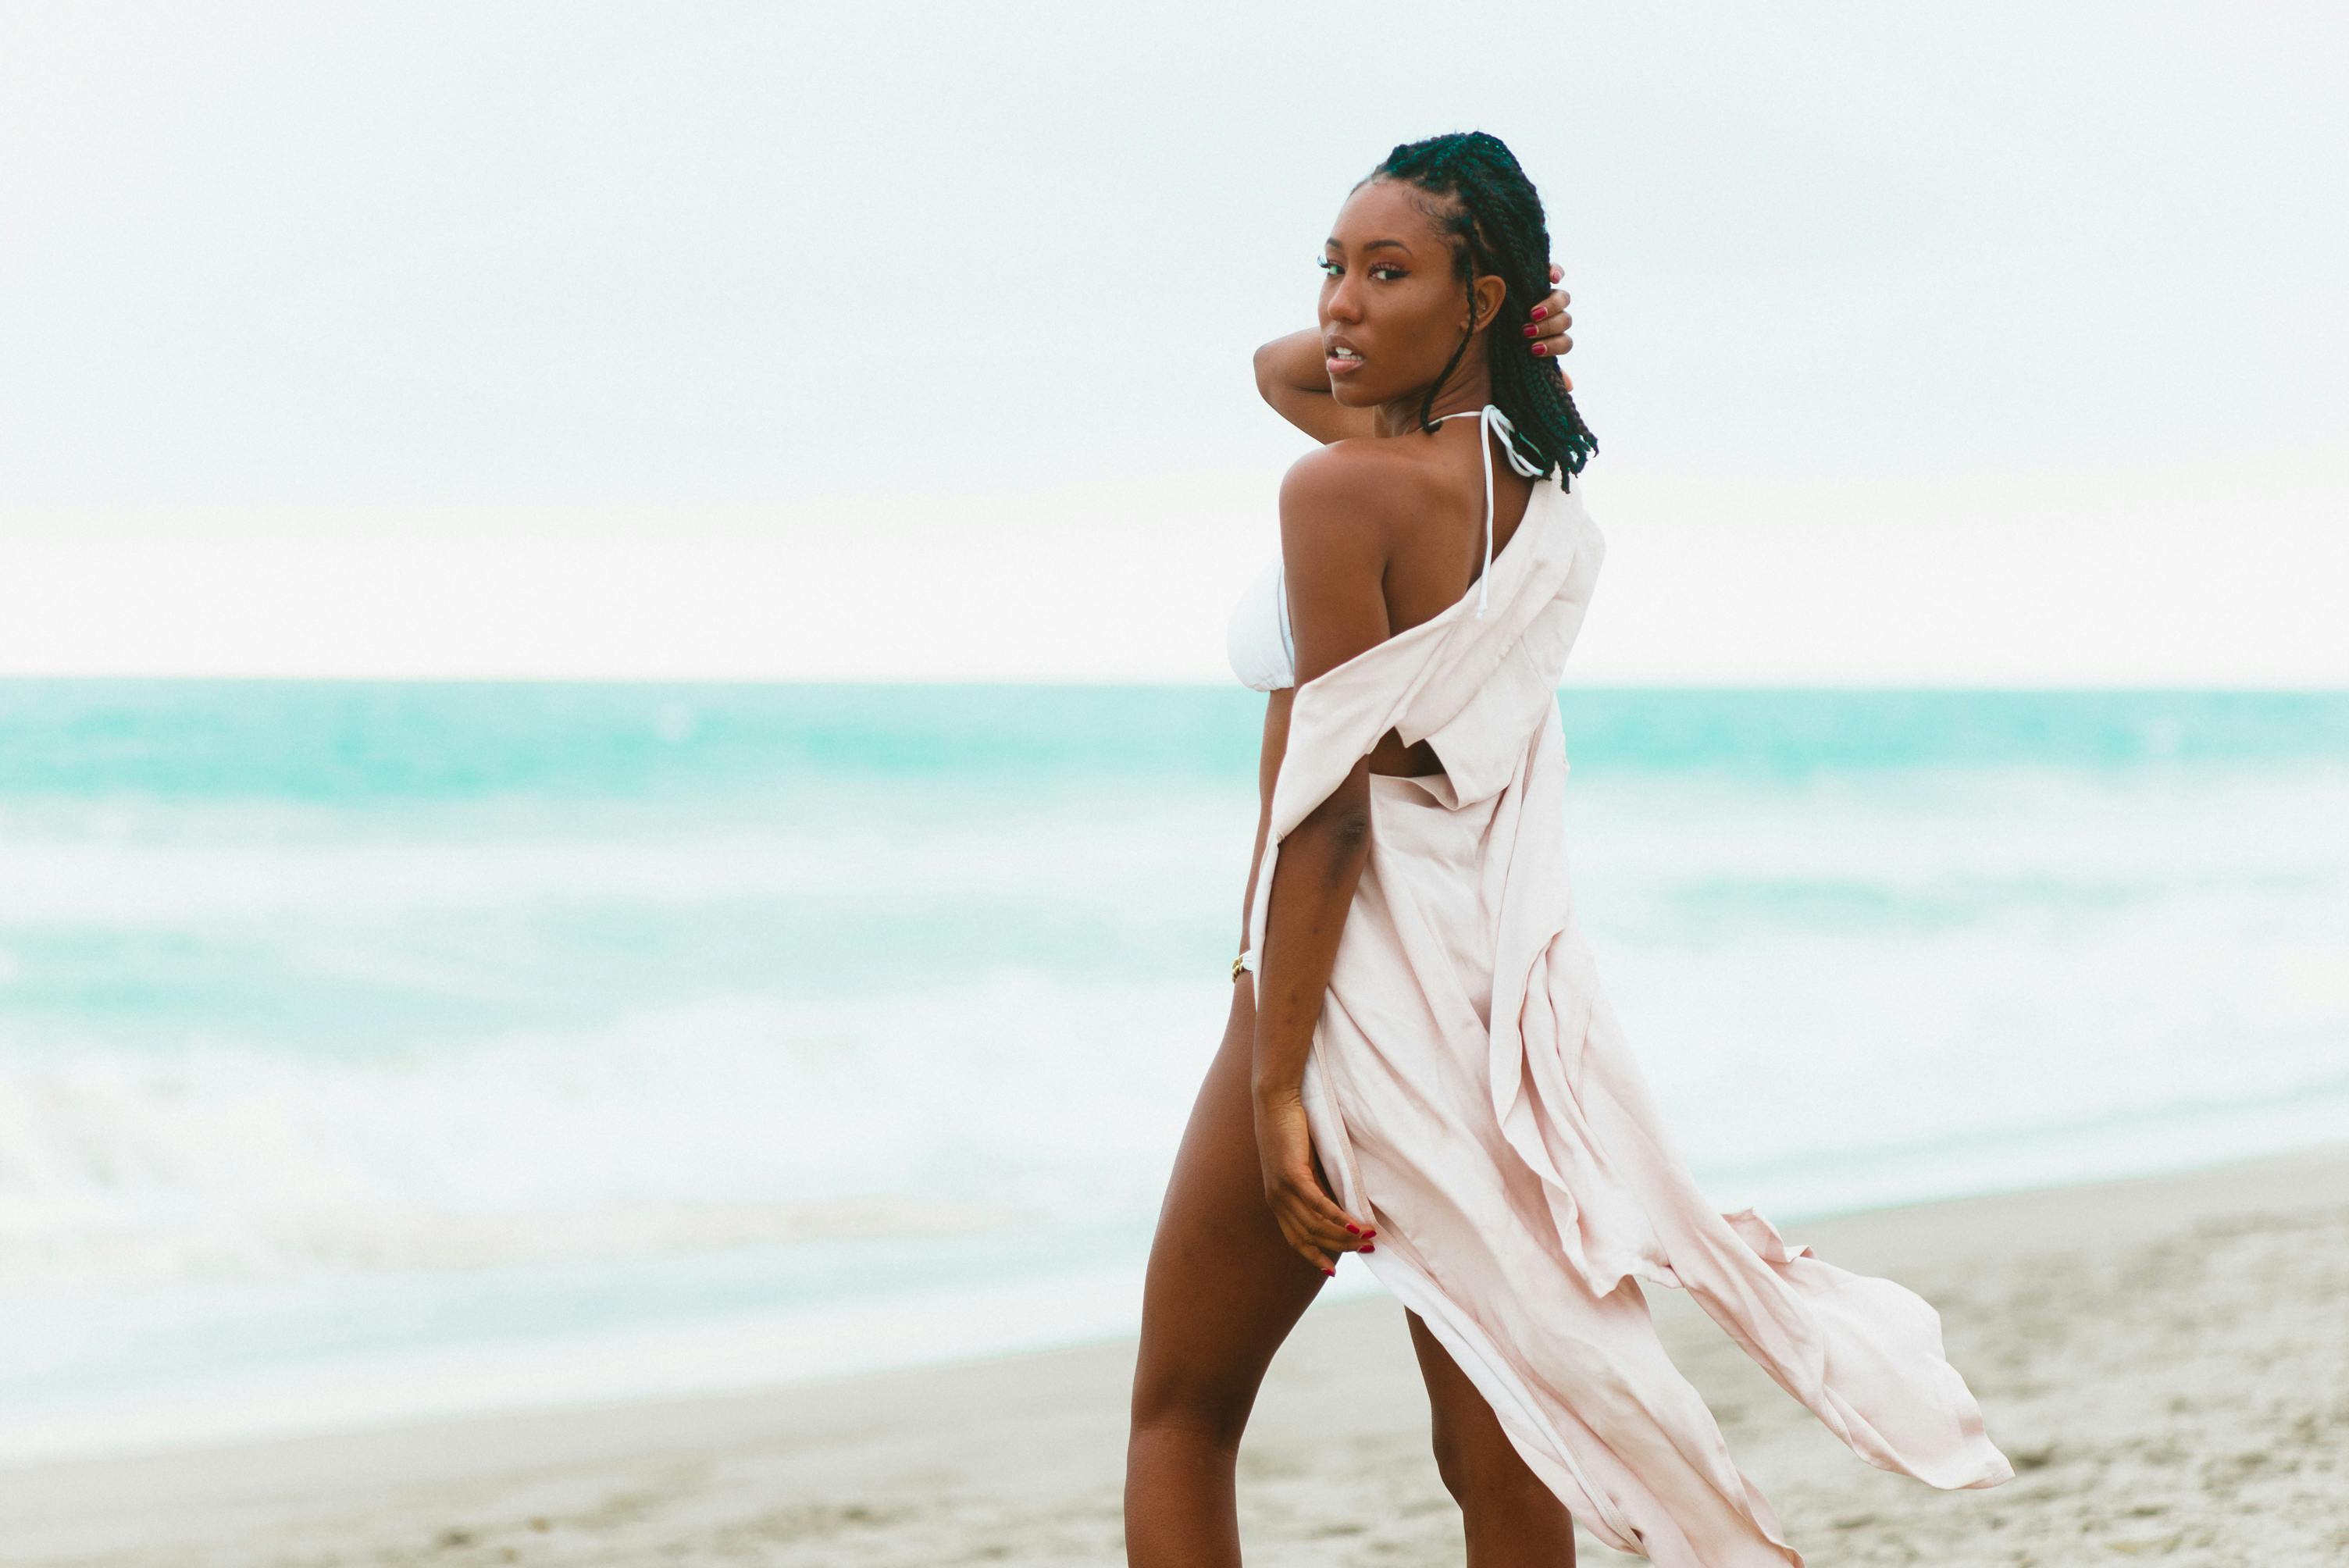 7 Beach Poses You Should Try On Your Next Getaway